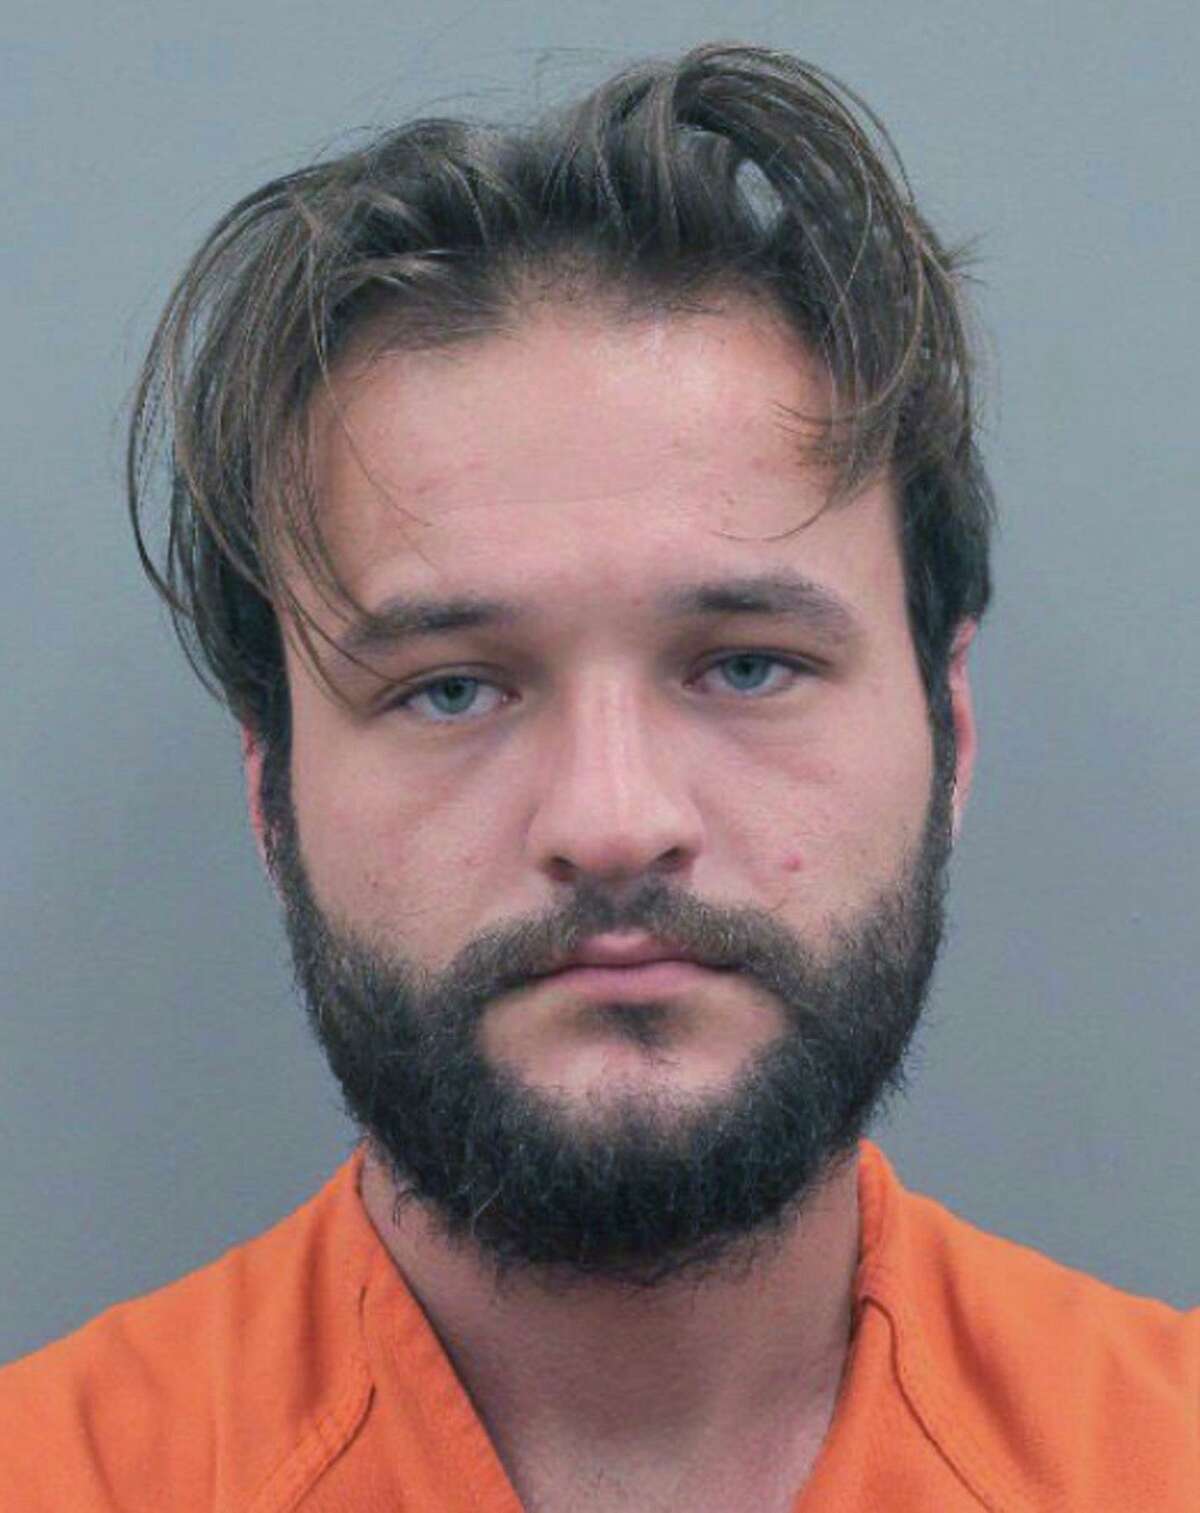 This photo provided by the Houston Police Department shows Jason Paul Robin. Robin, the father of a Houston infant, has been charged in her death after an autopsy found the child suffered a cracked skull and more than 90 fractures just days after being brought home from the hospital. Harris County prosecutors said Monday, June 24, 2019, that Jazmine Robin, who was born prematurely, was 10 weeks old when she died July 15, 2018, 12 days after leaving the hospital. Robin, and Jazmine's mother, 21-year-old Katharine Wyndham White, are facing charges. (Houston Police Department via AP)